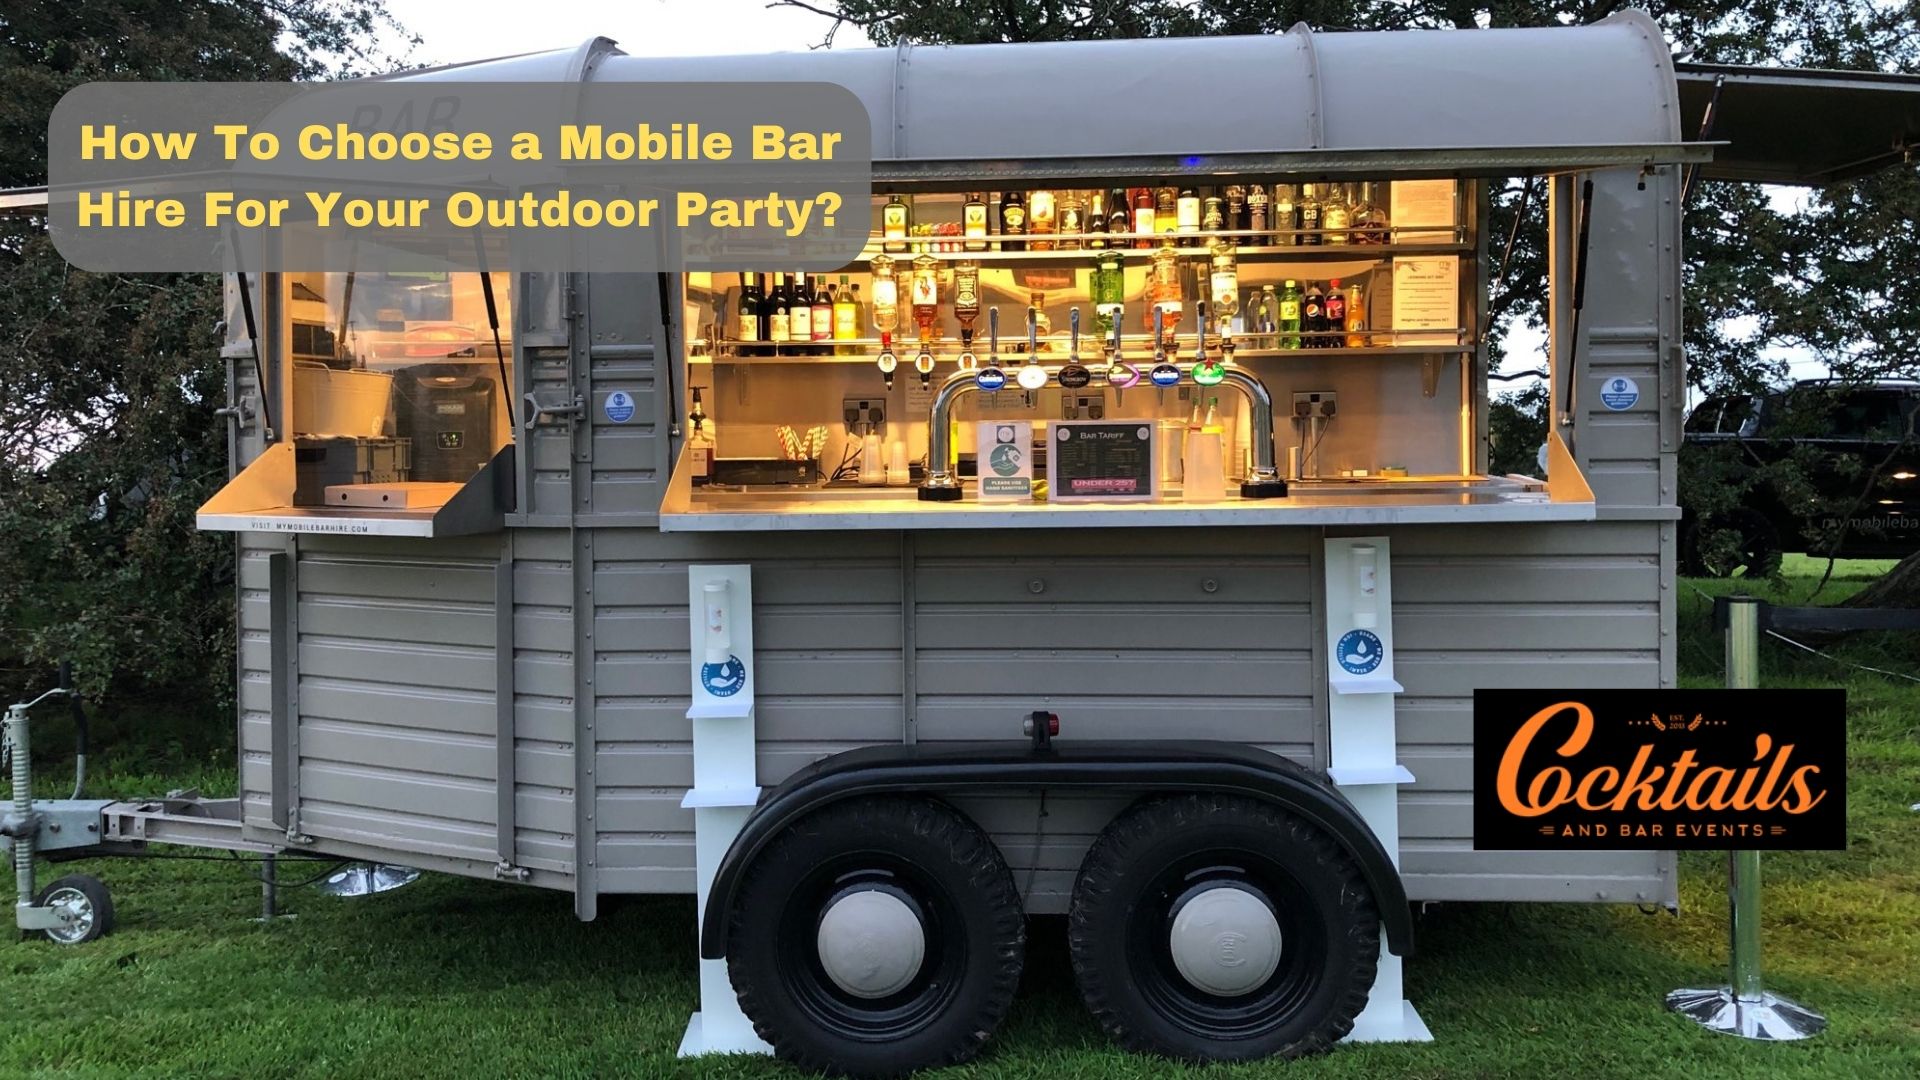 How To Choose a Mobile Bar Hire For Your Outdoor Party? -